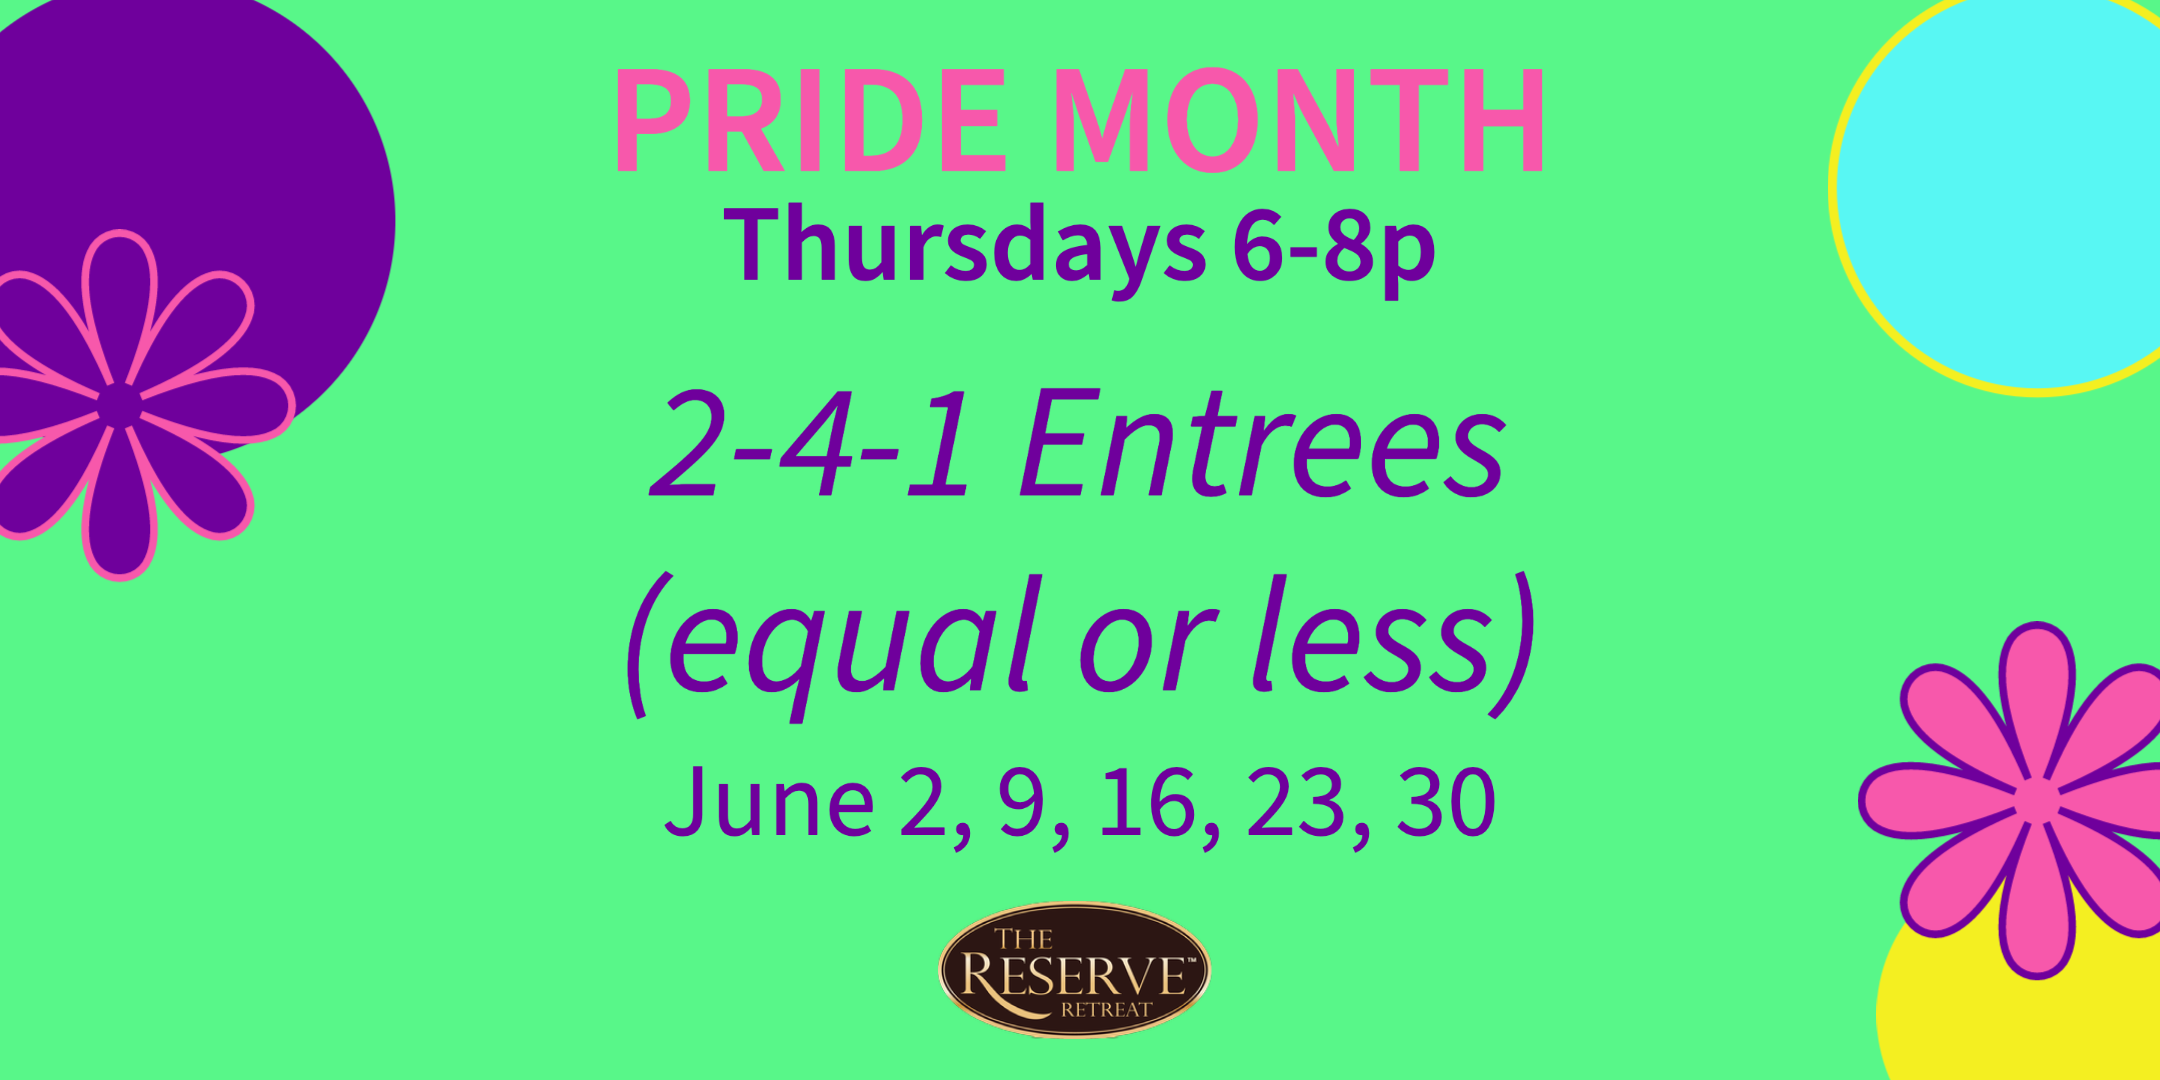 During June for Pride Month, on Thursdays from 6-8pm, get 2-4-1 entrees (lesser or equal value)